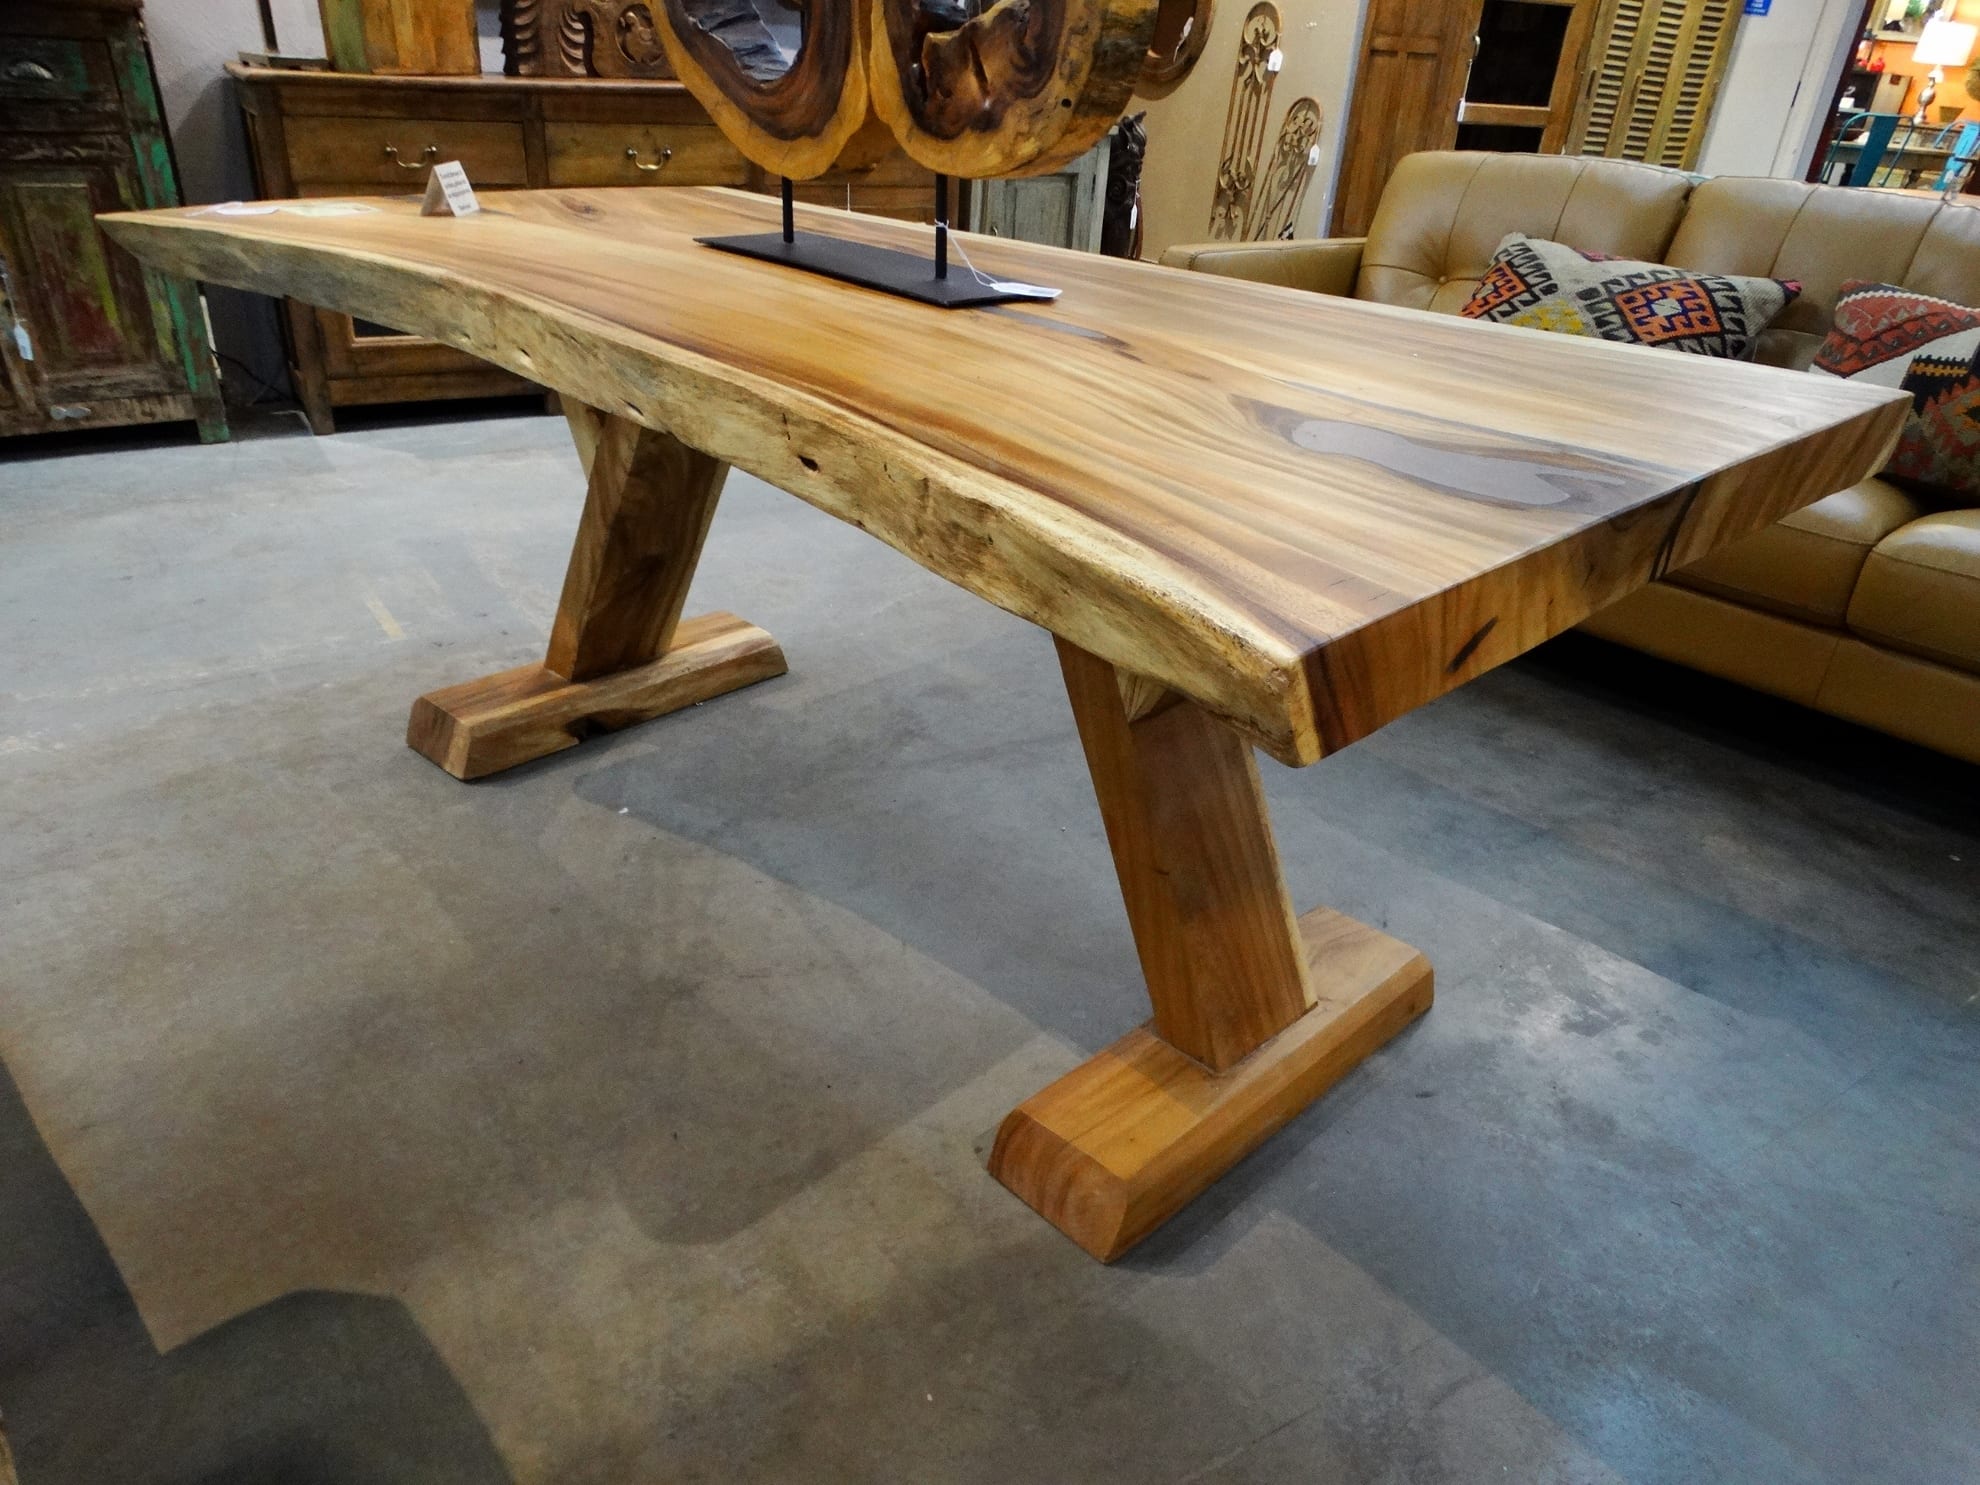  kitchen tables rustic wood